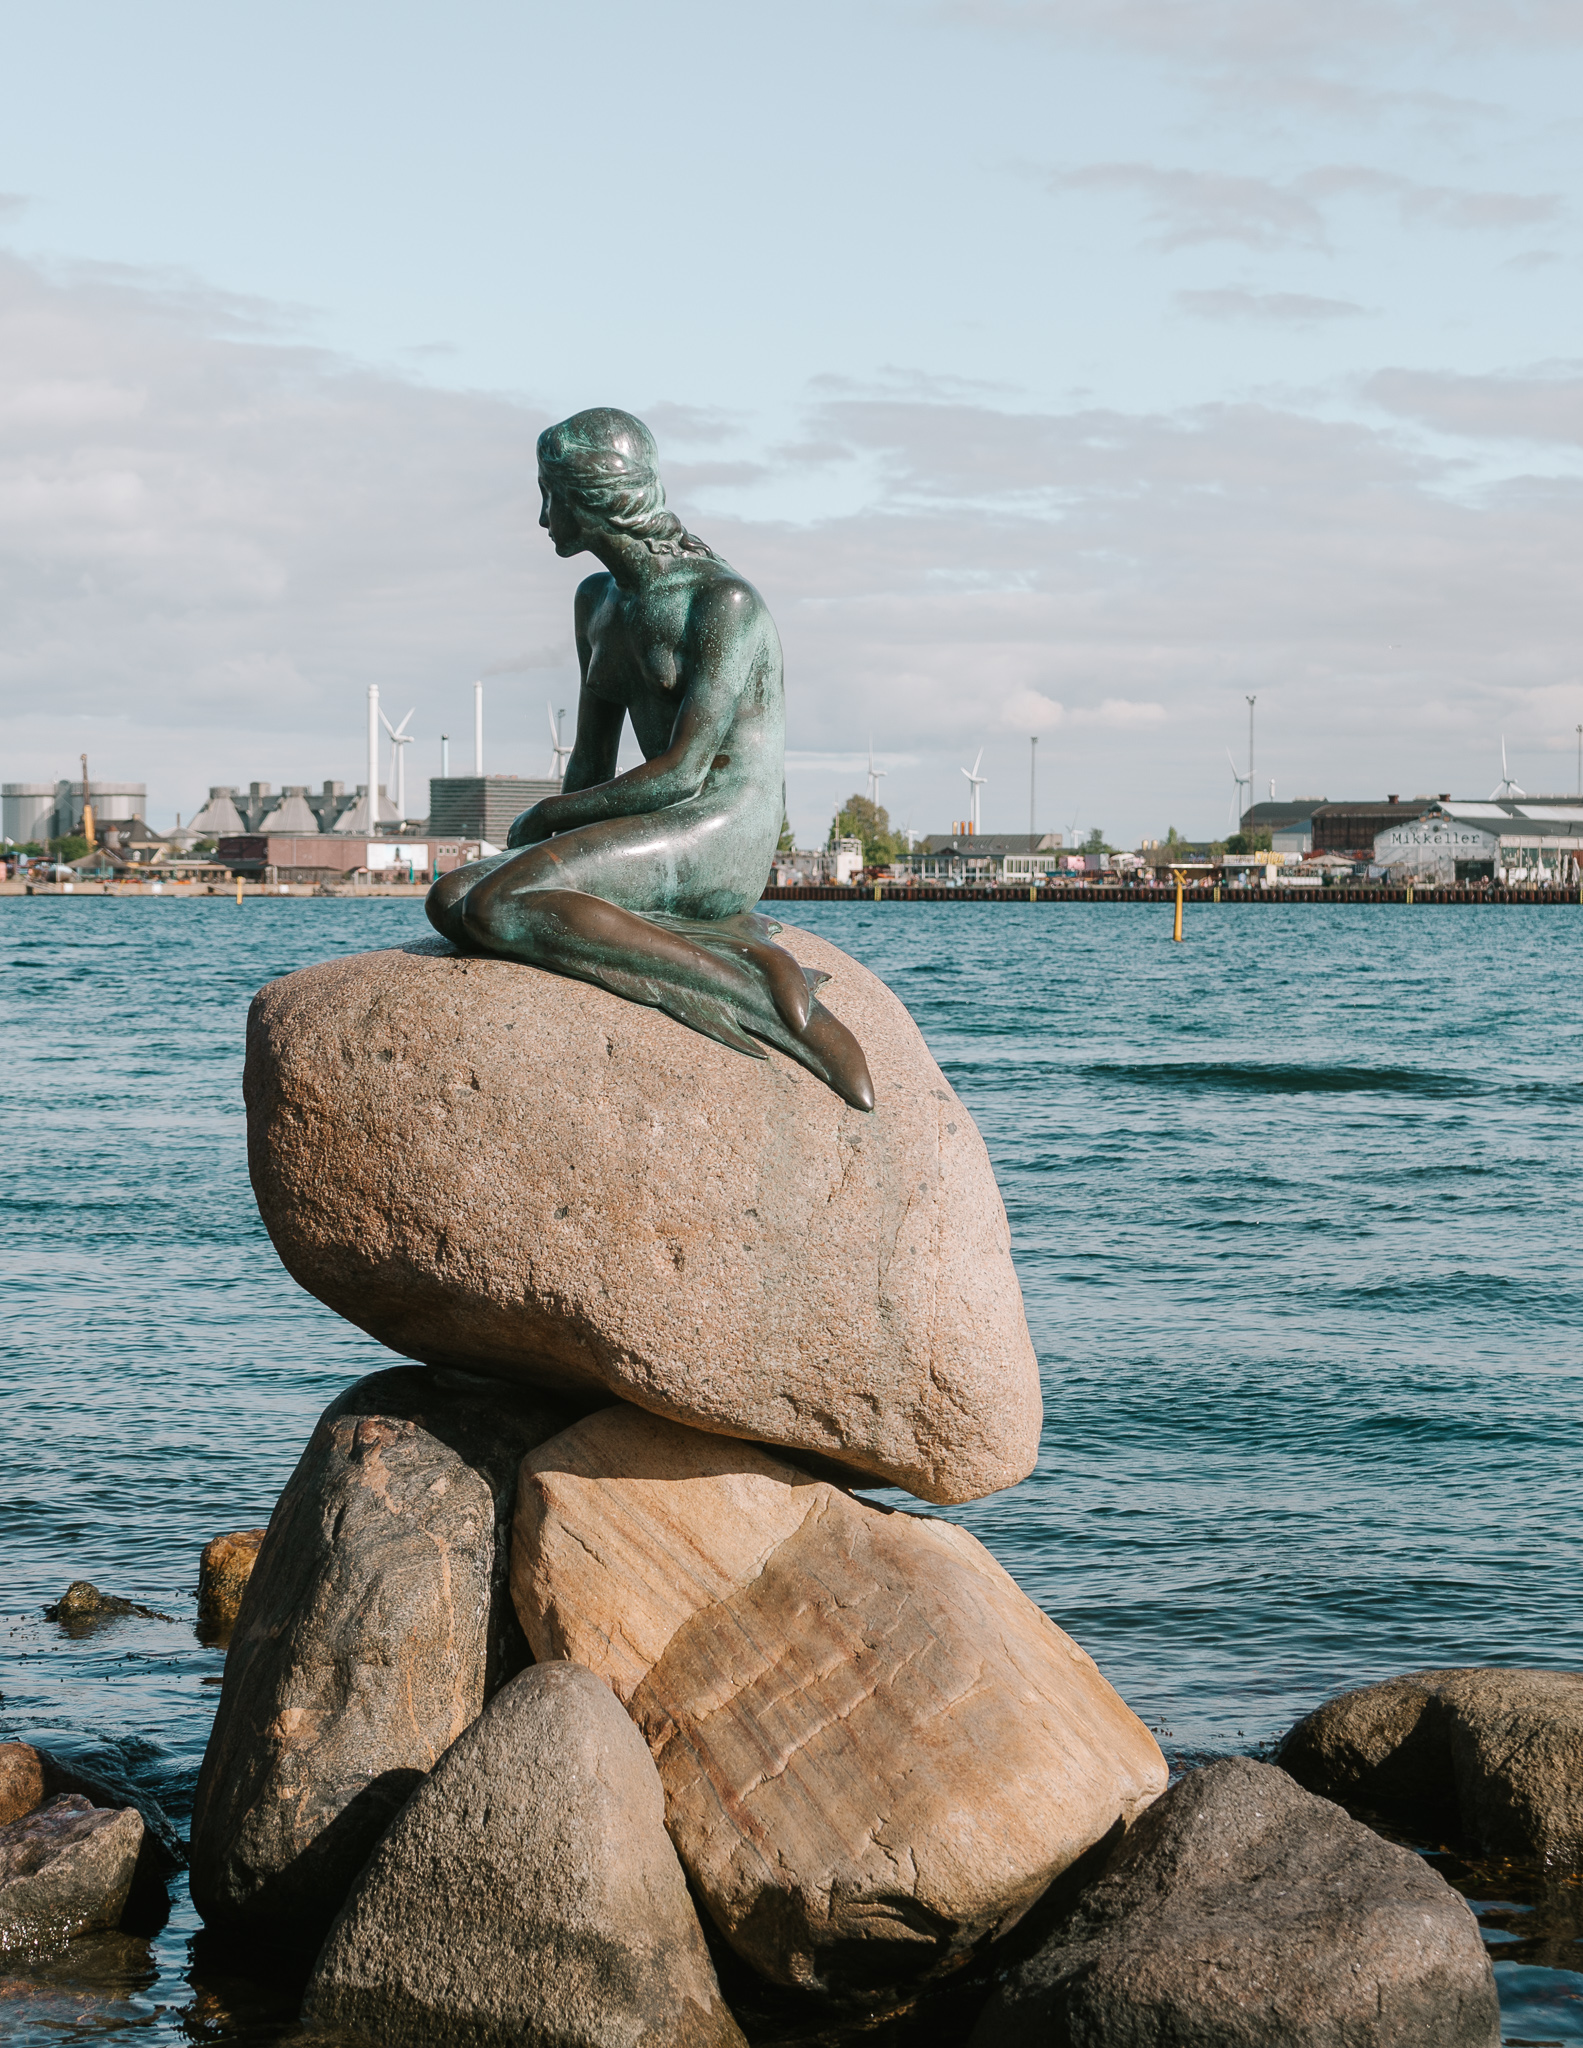 The little Mermaid stayue on a pile of large boulders stakced on eachother, next to a river with windmills on the banks behind in Kastellet, Copenhagen.